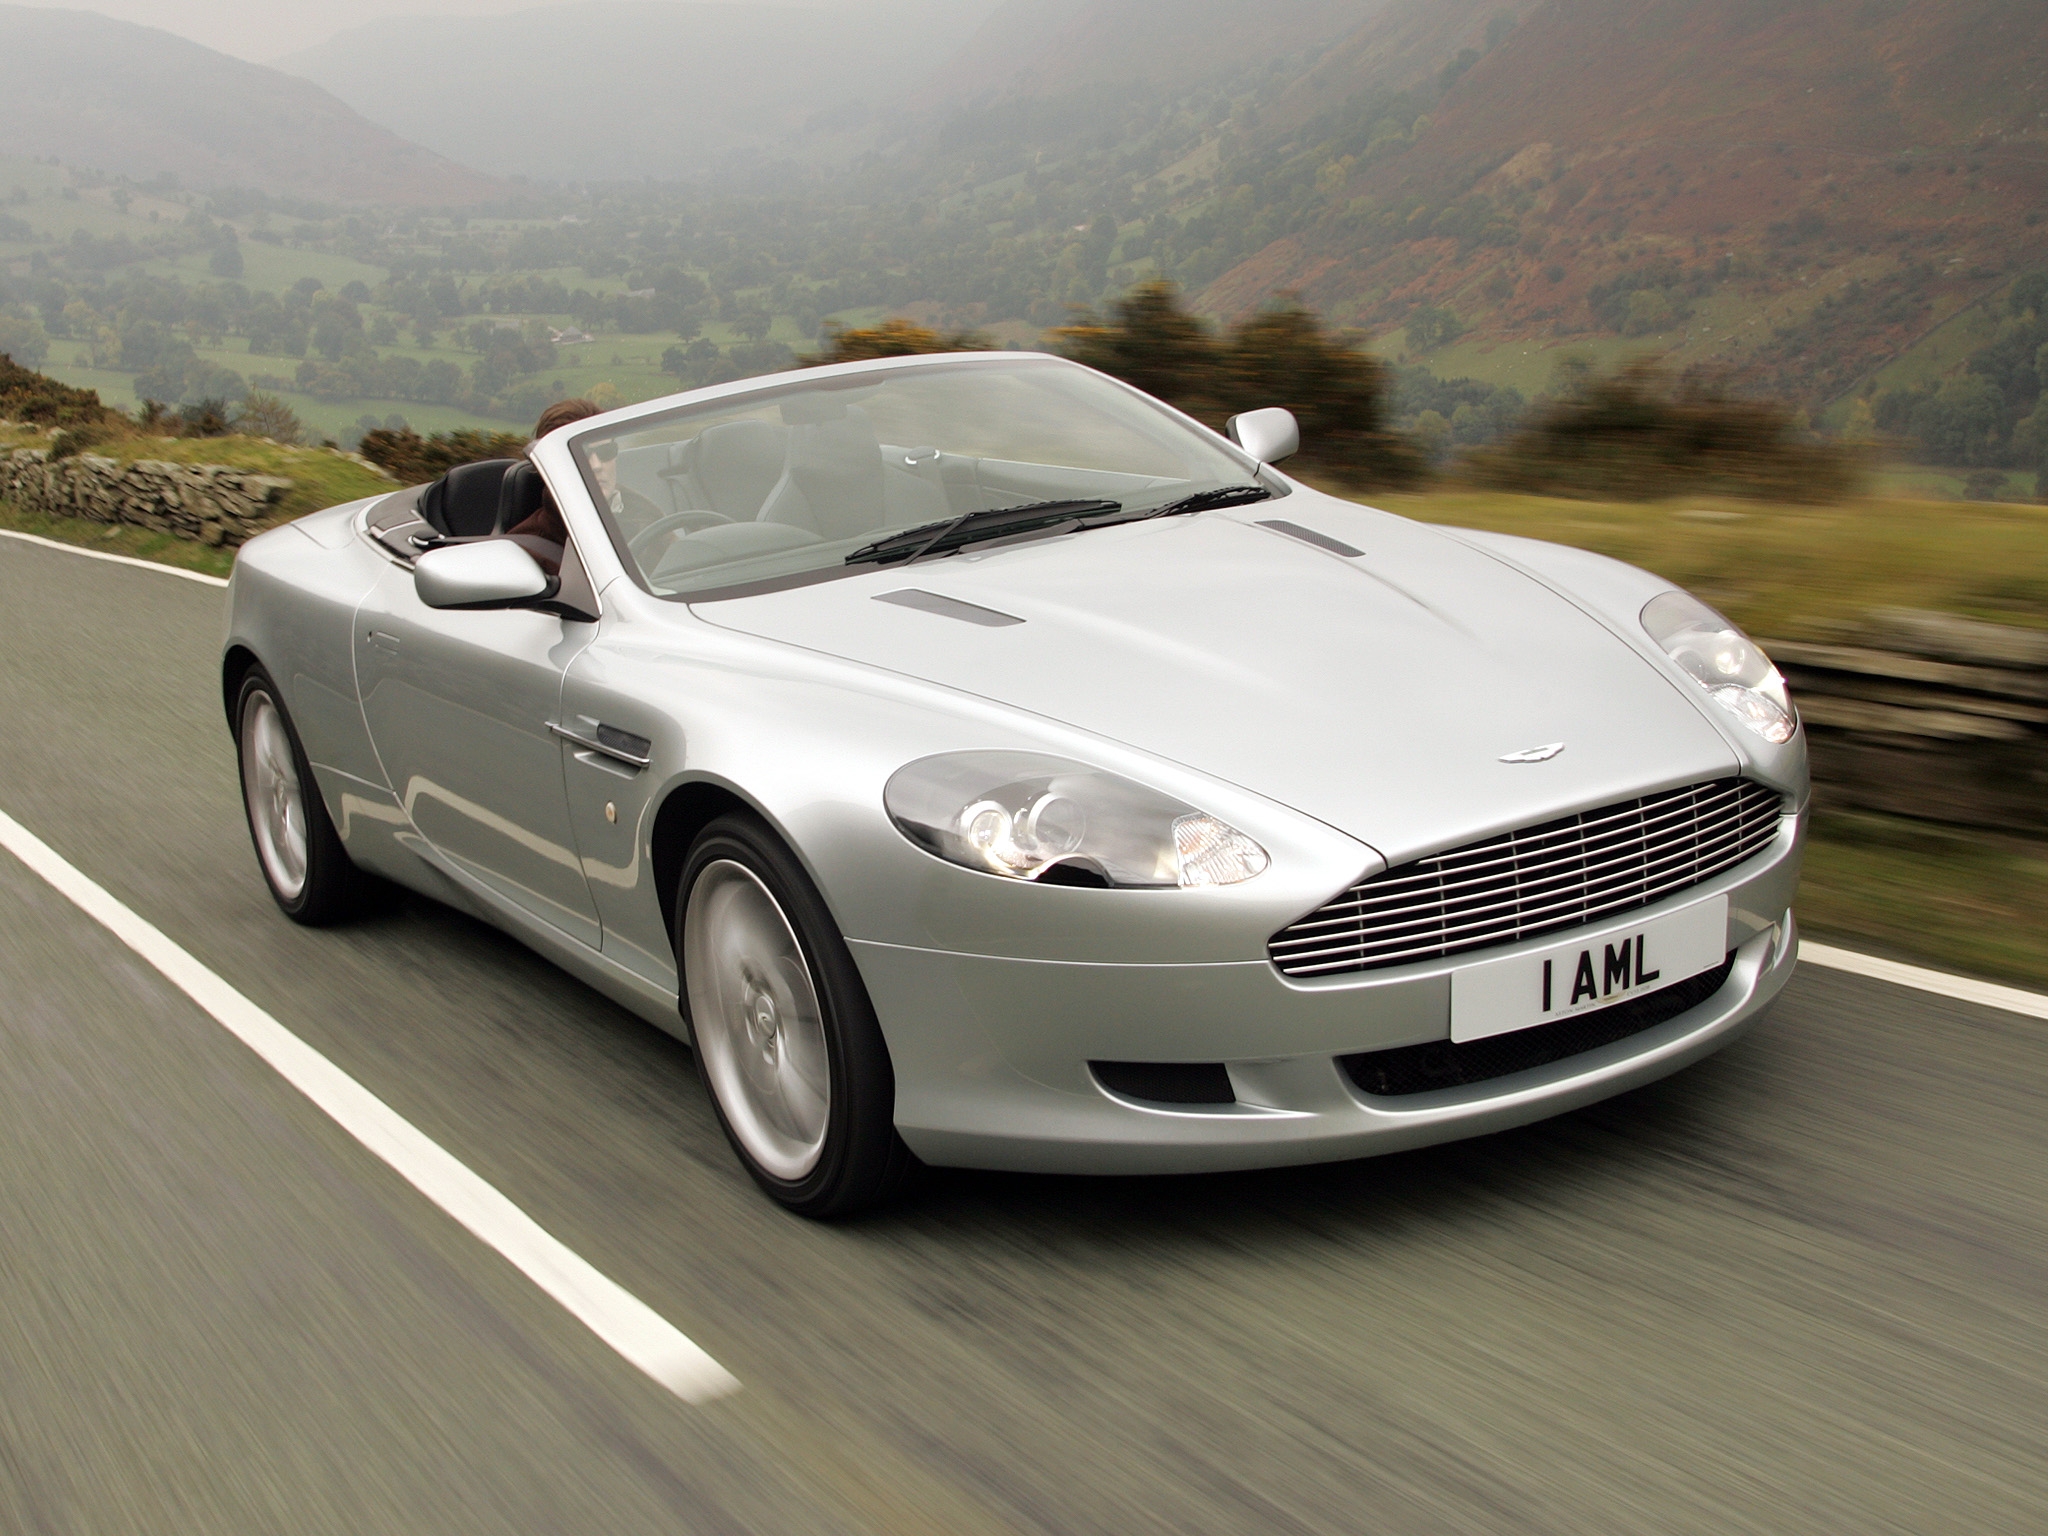 nature, aston martin, cars, front view, speed, style, 2004, silver metallic, db9 Full HD